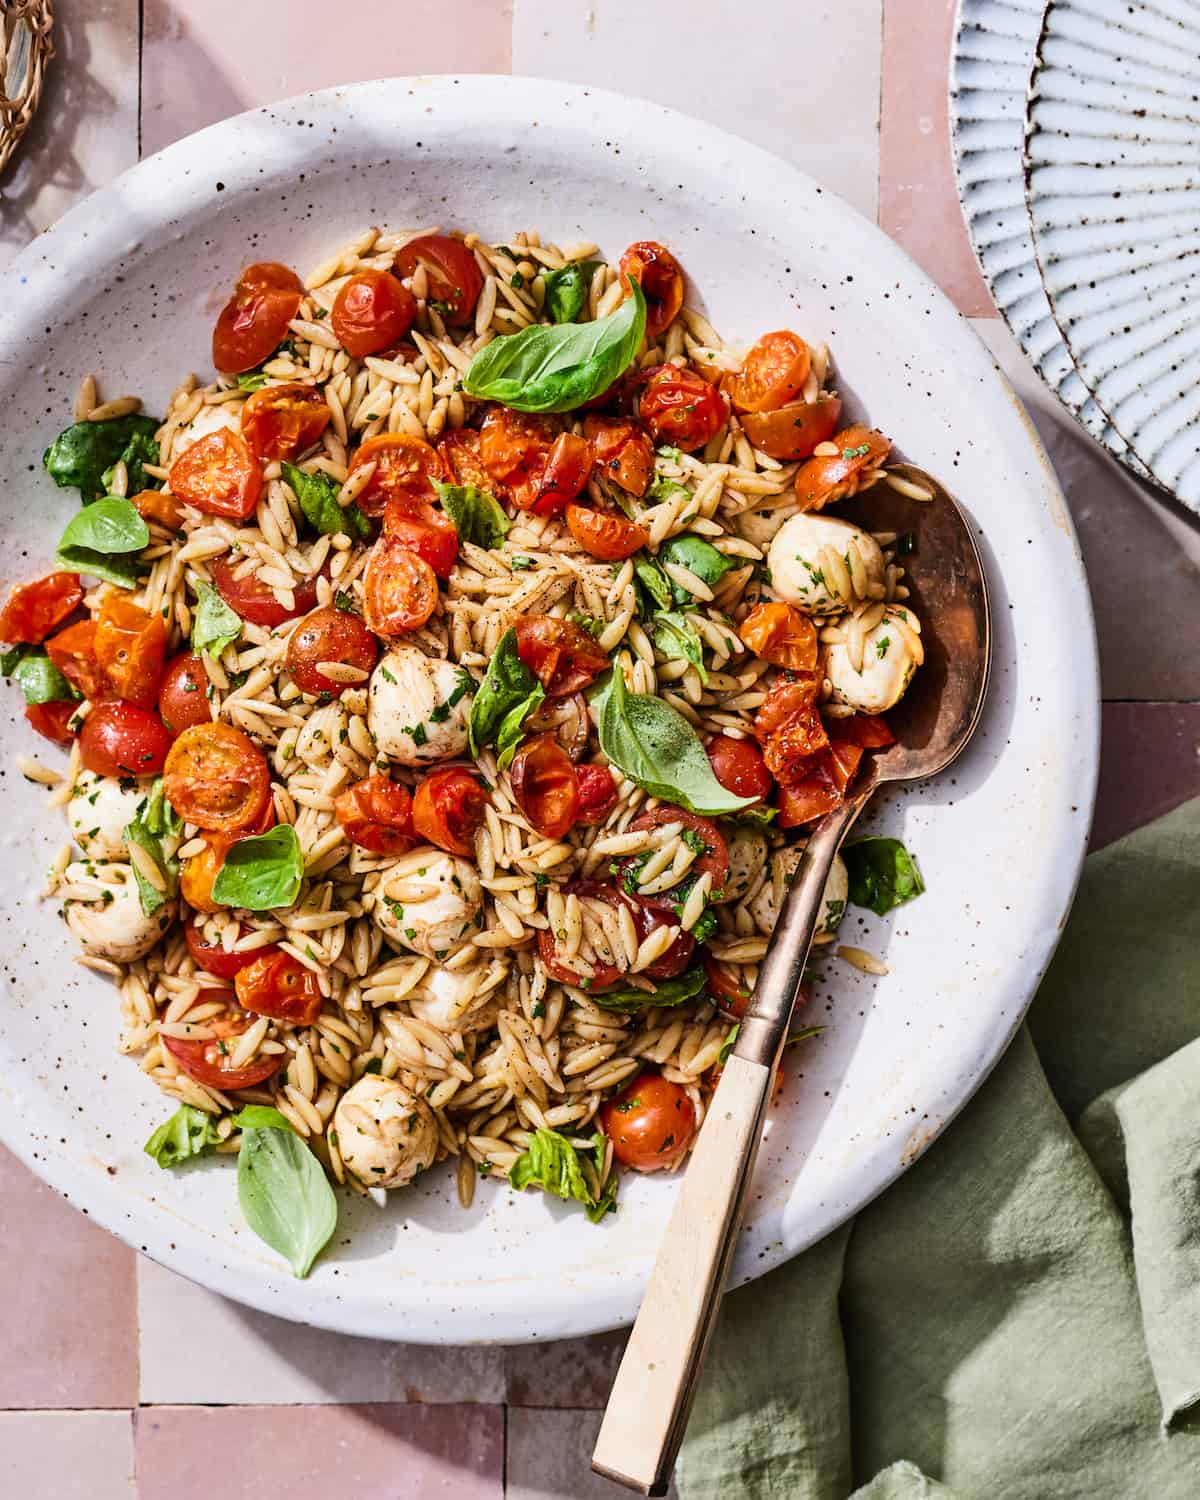 A large gray ceramic bowl of orzo pasta salad with jammy tomatoes, fresh basil leaves, and small mozzarella balls in a balsamic vinaigrette on a pink tiled table with a green napkin in the lower right corner and a stack of two ridged gray ceramic plates in the upper right Corner. 